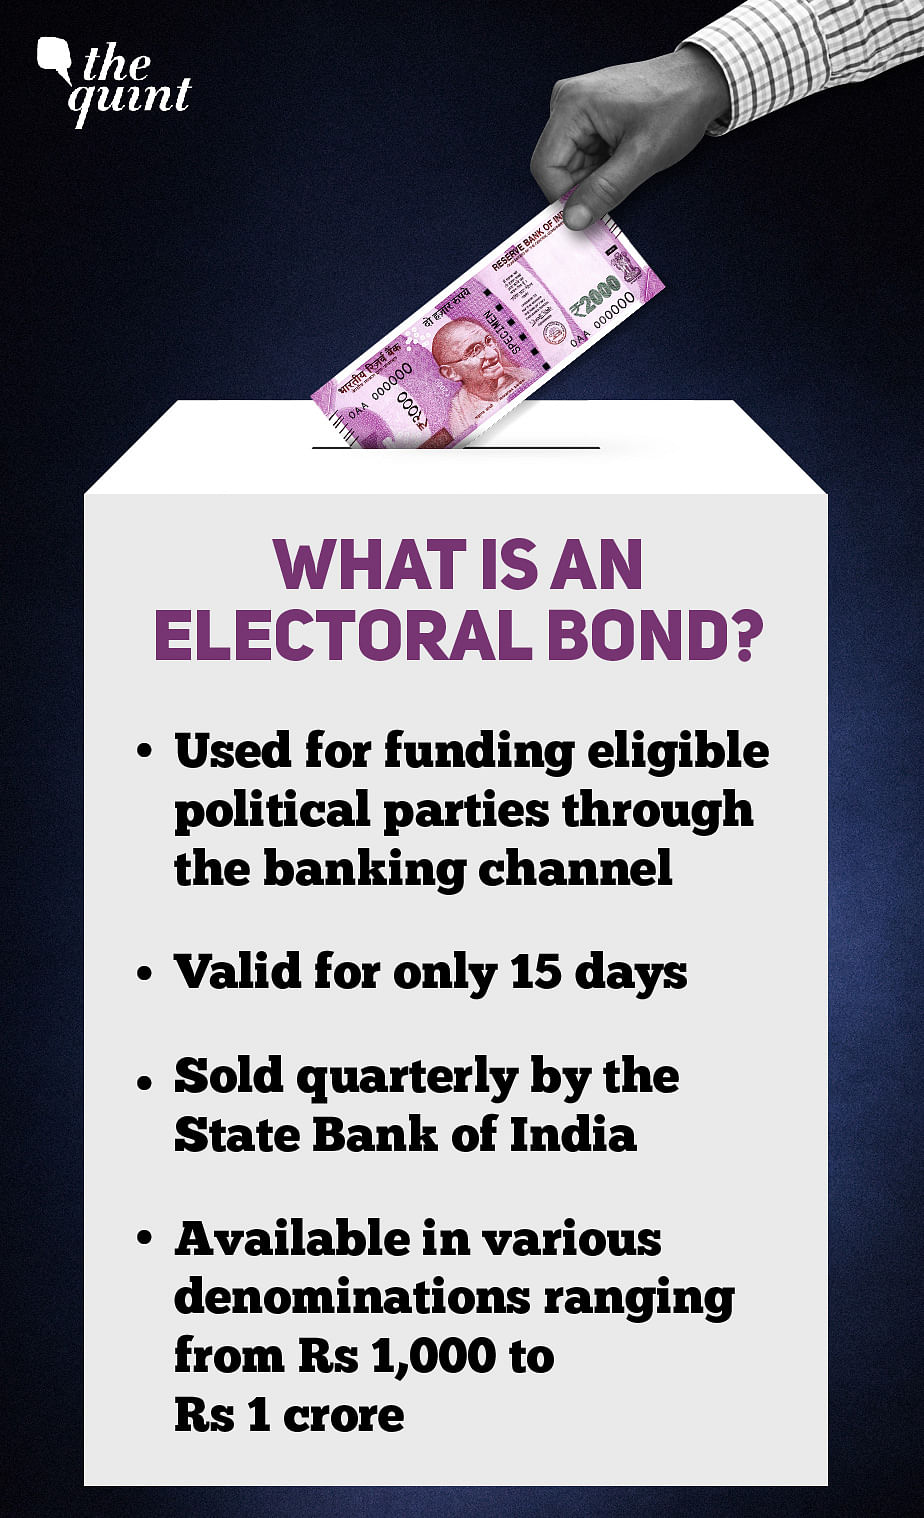 The anonymity of electoral bonds can protect the donor’s  identity, but  it also enables their misuse.